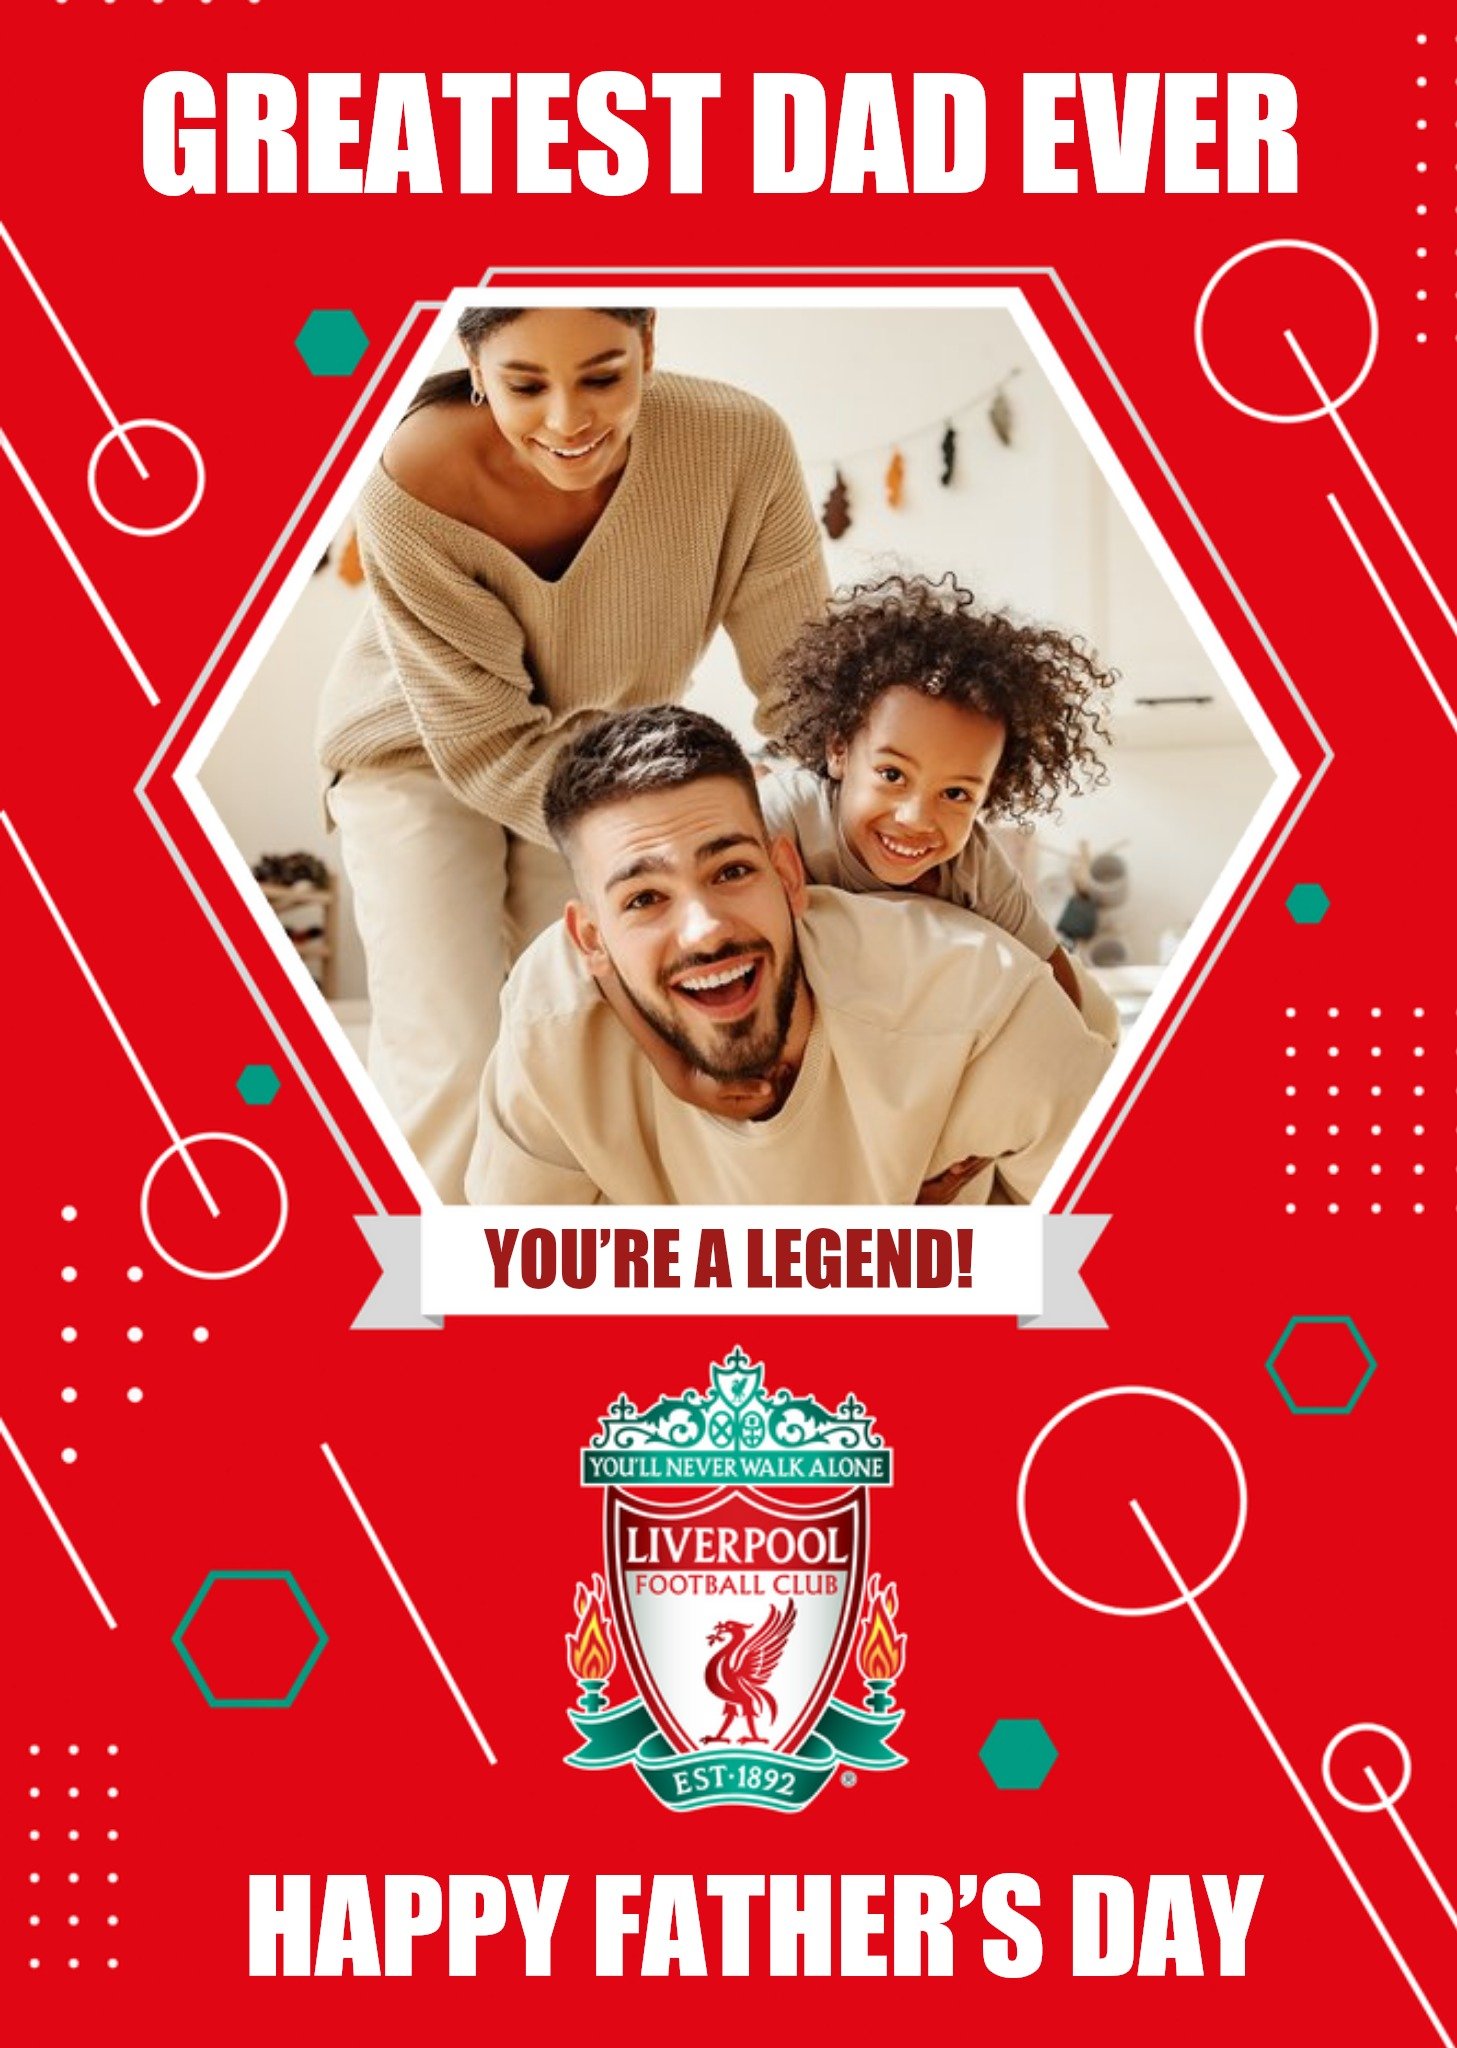 Liverpool Fc Football Legend Greatest Dad Ever Photo Upload Fathers Day Card Ecard